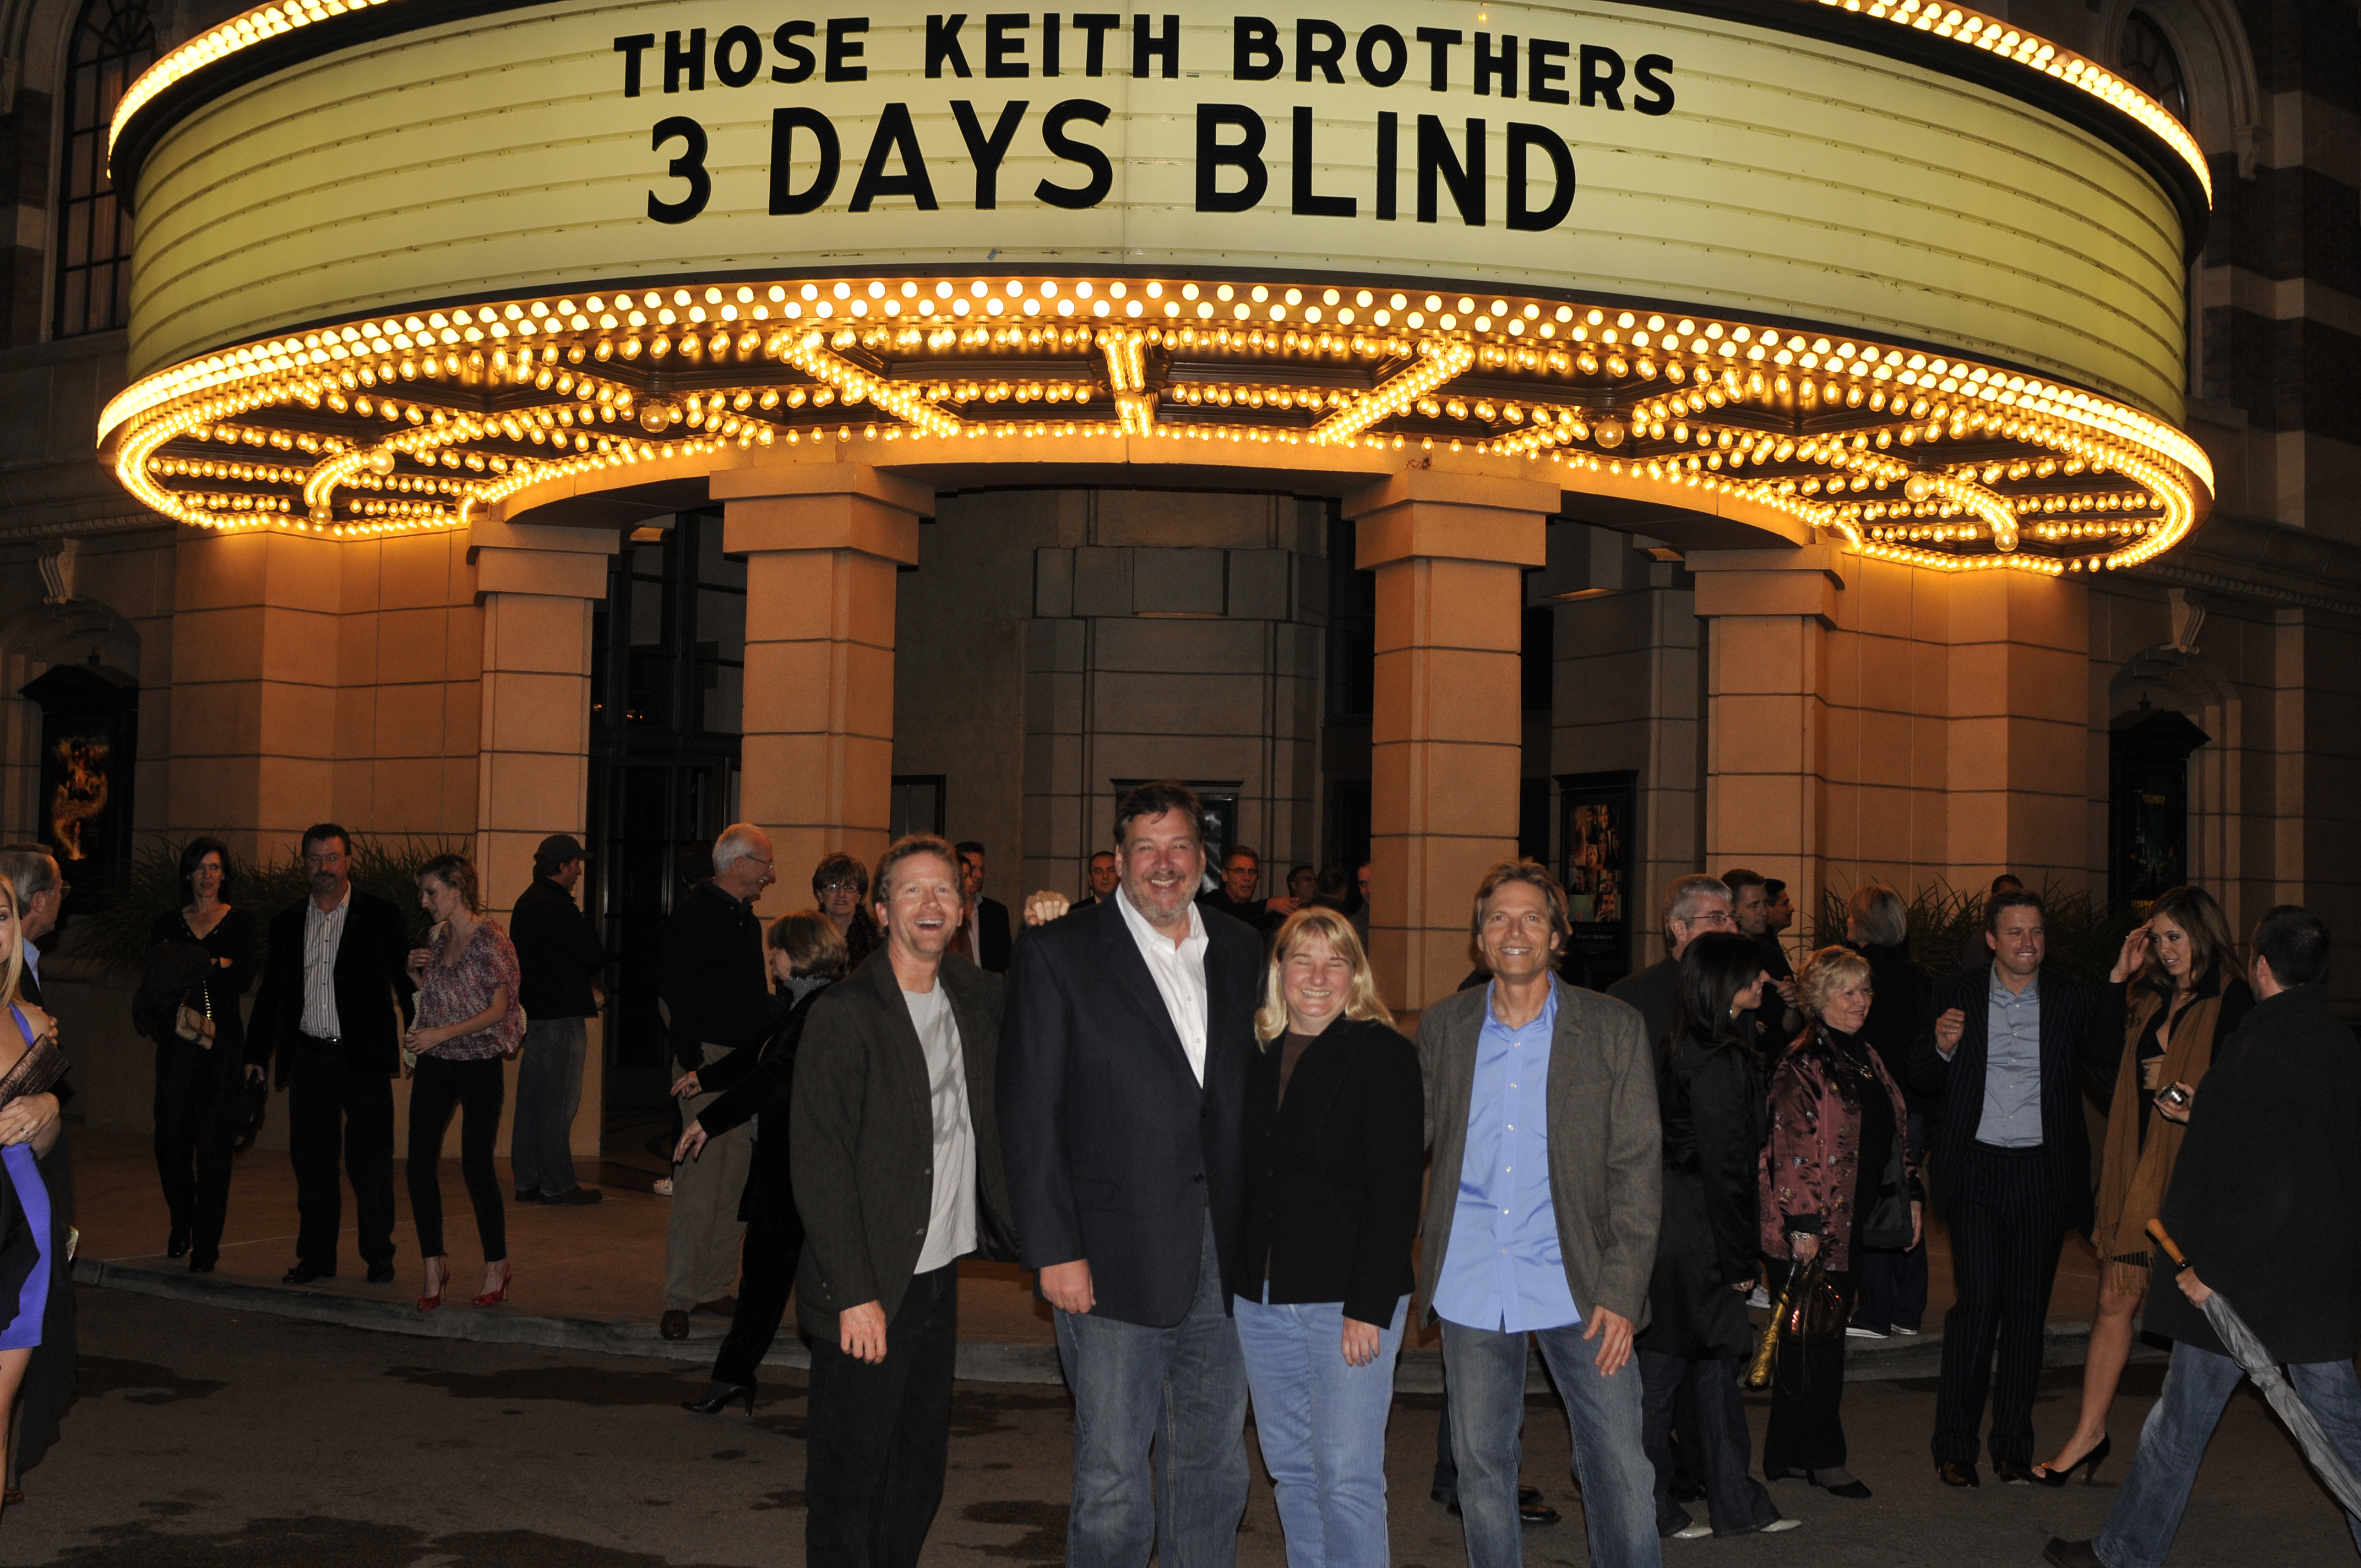 Stephen J. Ross theatre, Warner Brothers. 3 Days Blind premiere. L/R: Director Clete Keith; EP's Arthur Bergel, Susan Fowler; Producer Christopher Keith.